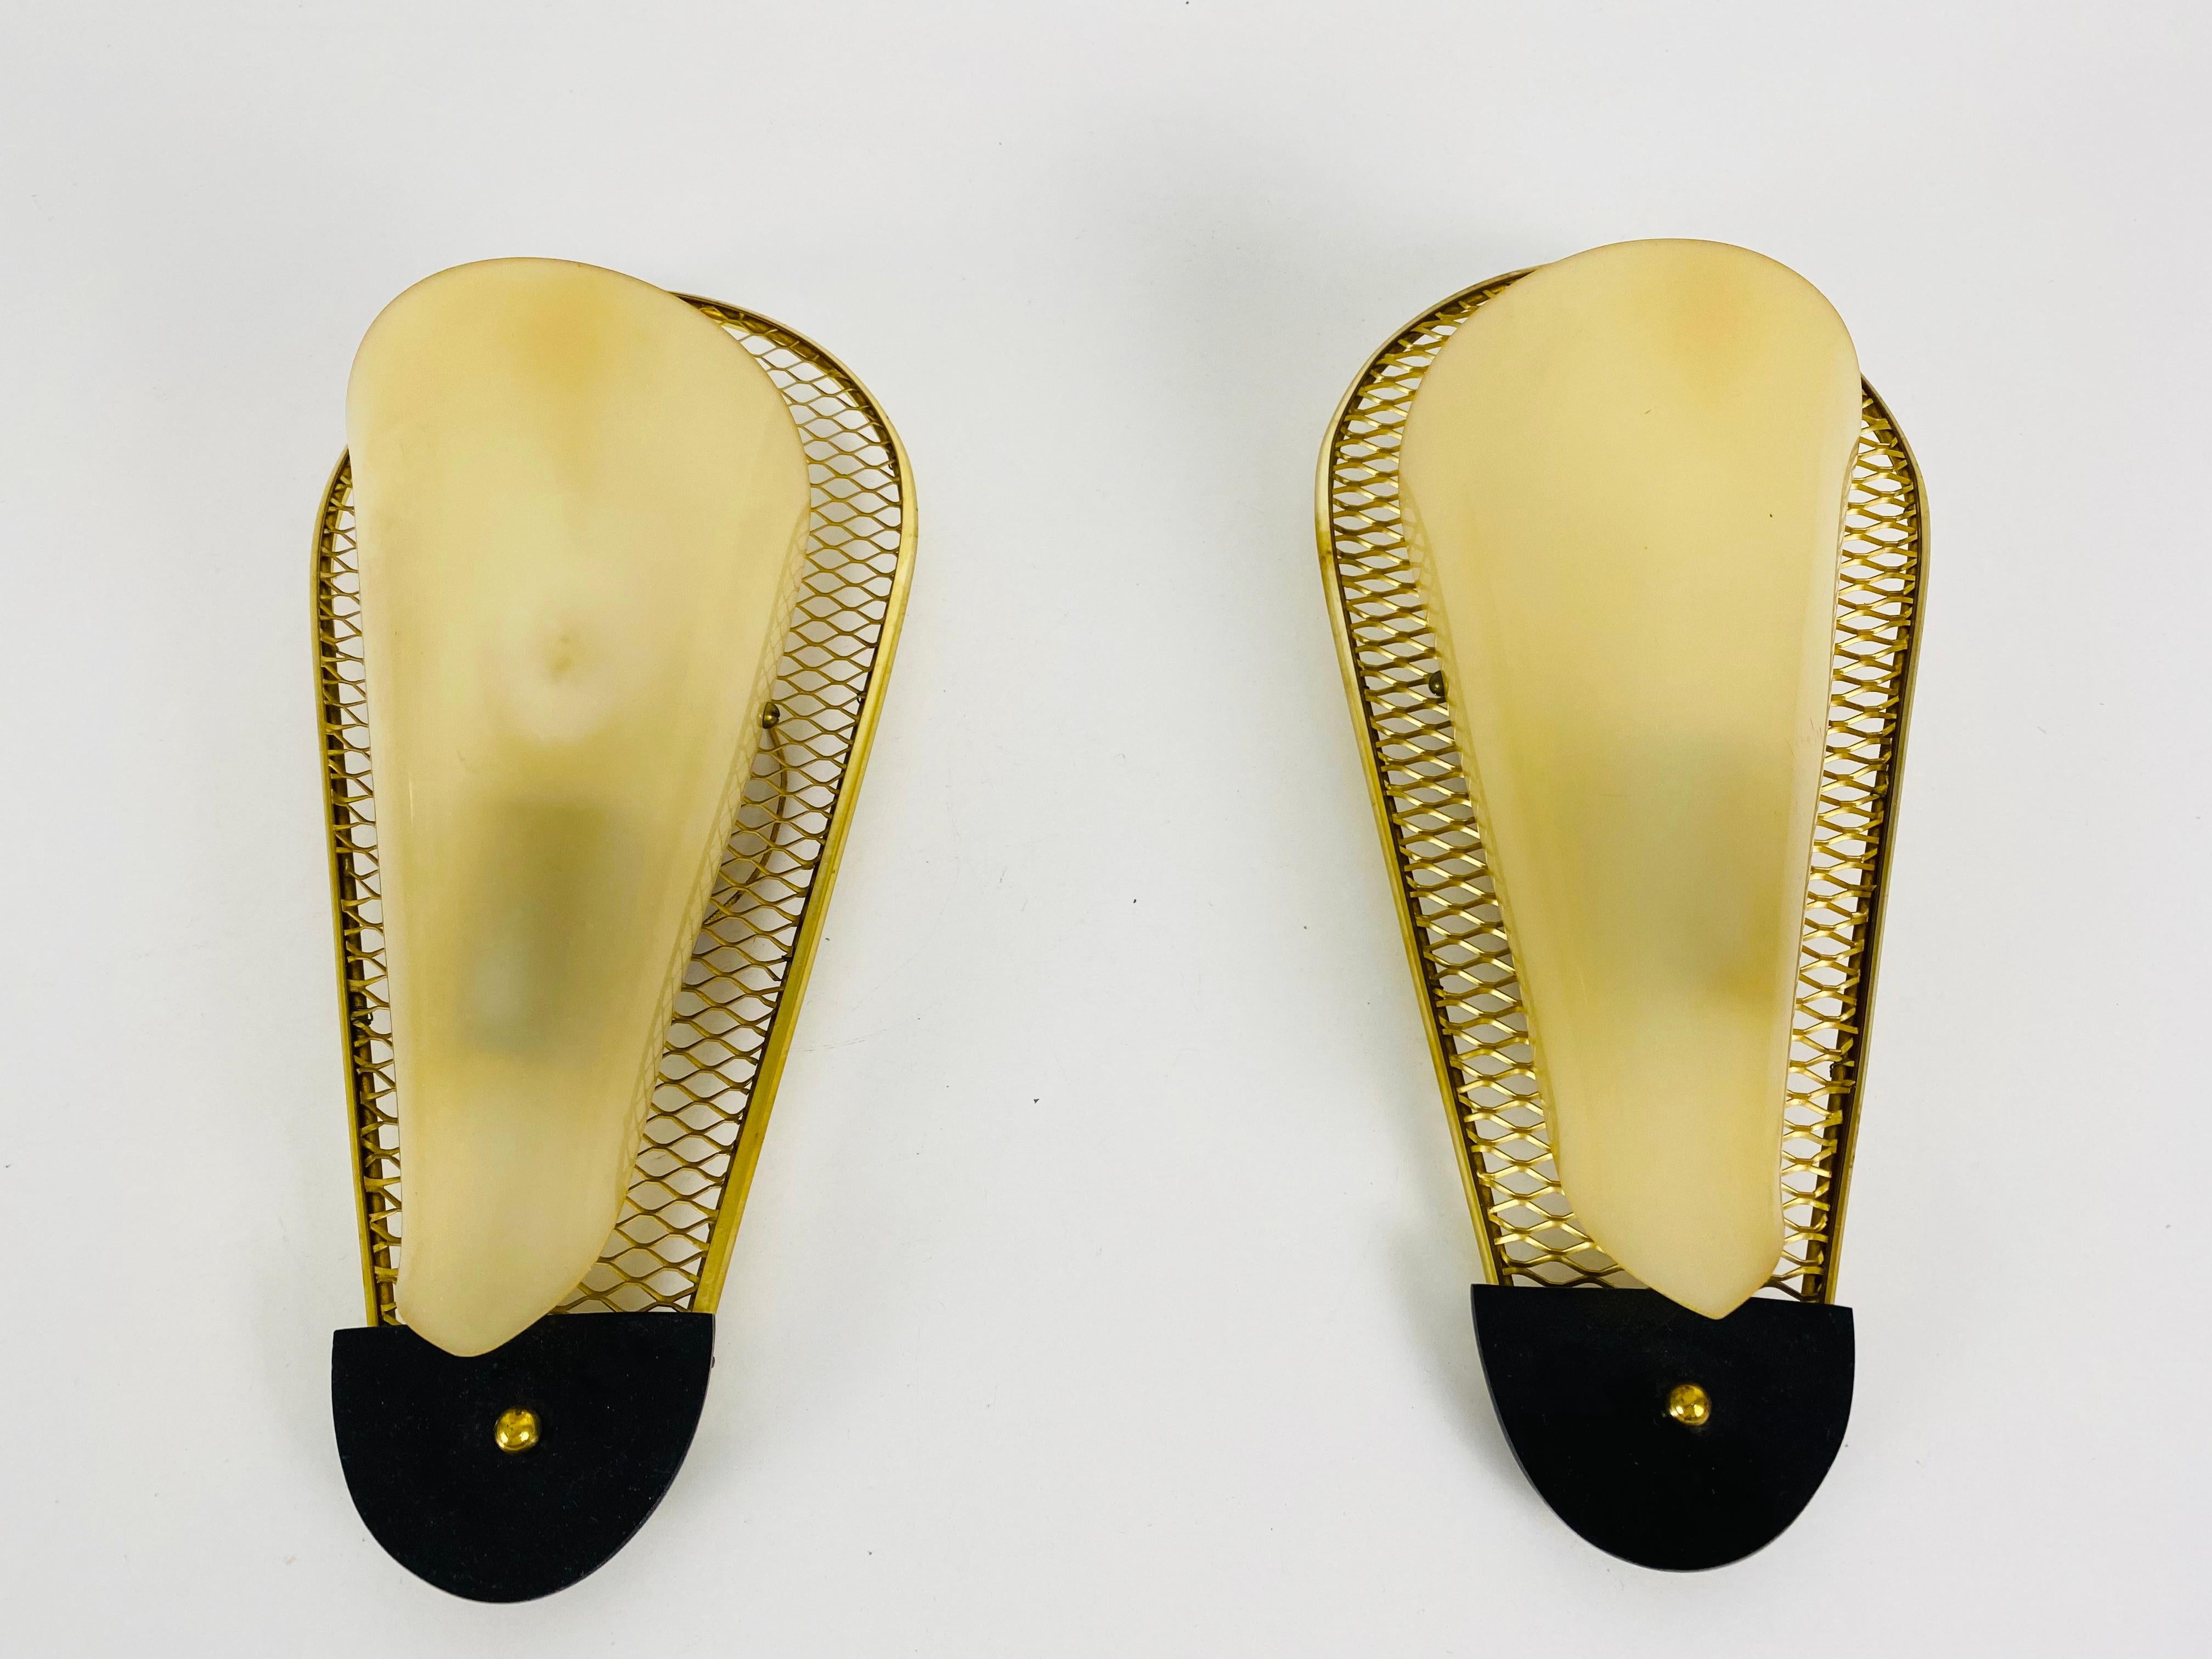 Amazing pair of wall lamps made in Italy in the 1960s. Beautiful mid century design. Made of brass and plexiglass.

The light requires one E14 light bulb. Works with both 110/220 V. Very good vintage condition.

Free worldwide express shipping.